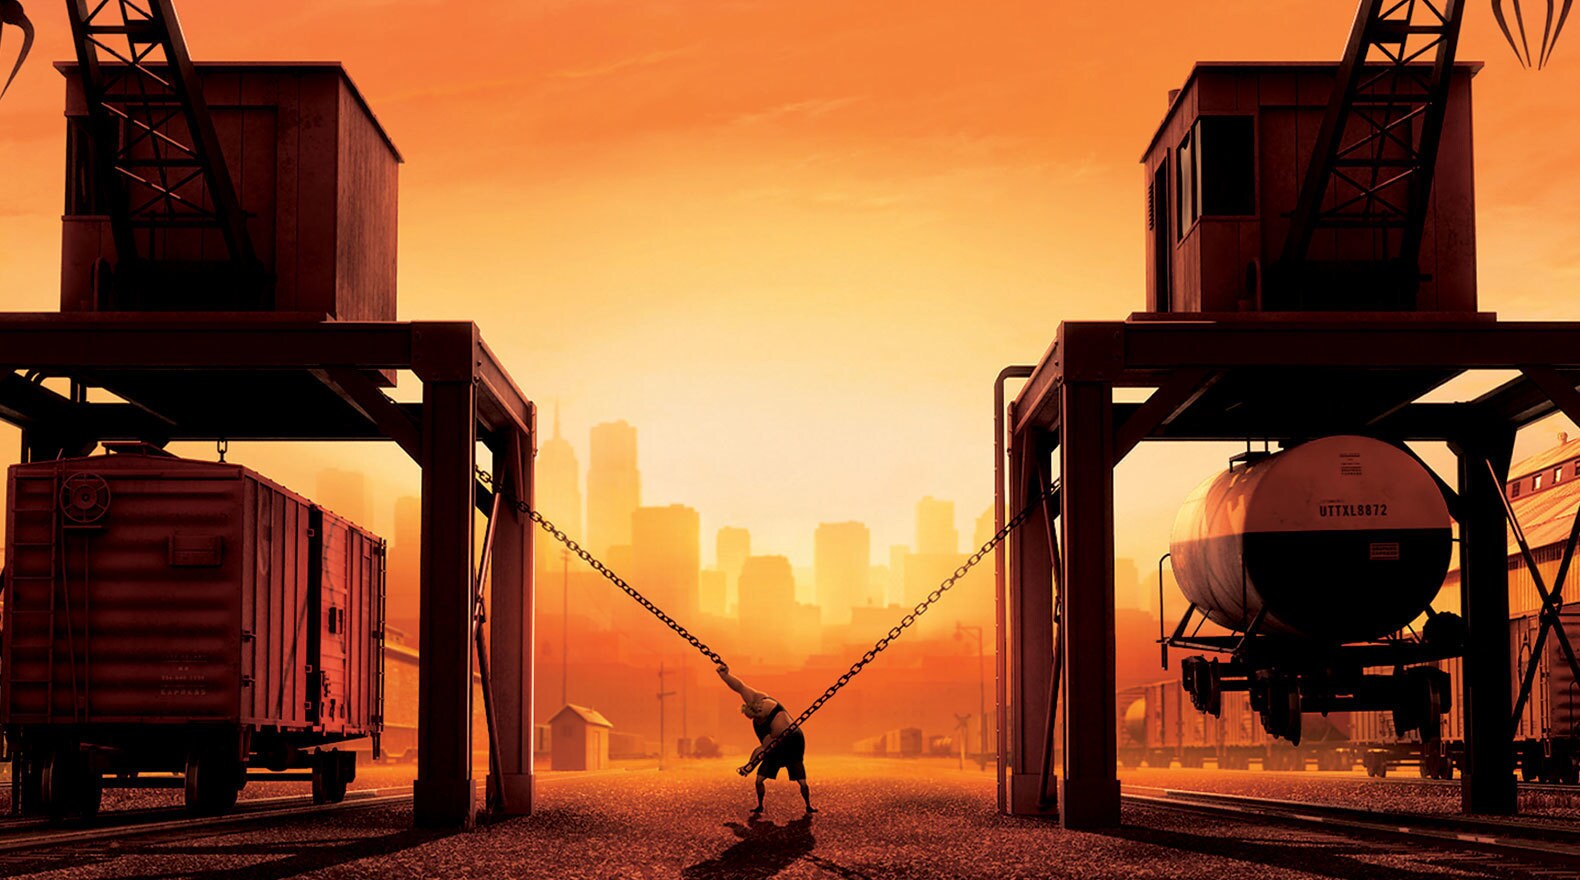 Mr. Incredible working out using freight trains in "The Incredibles"